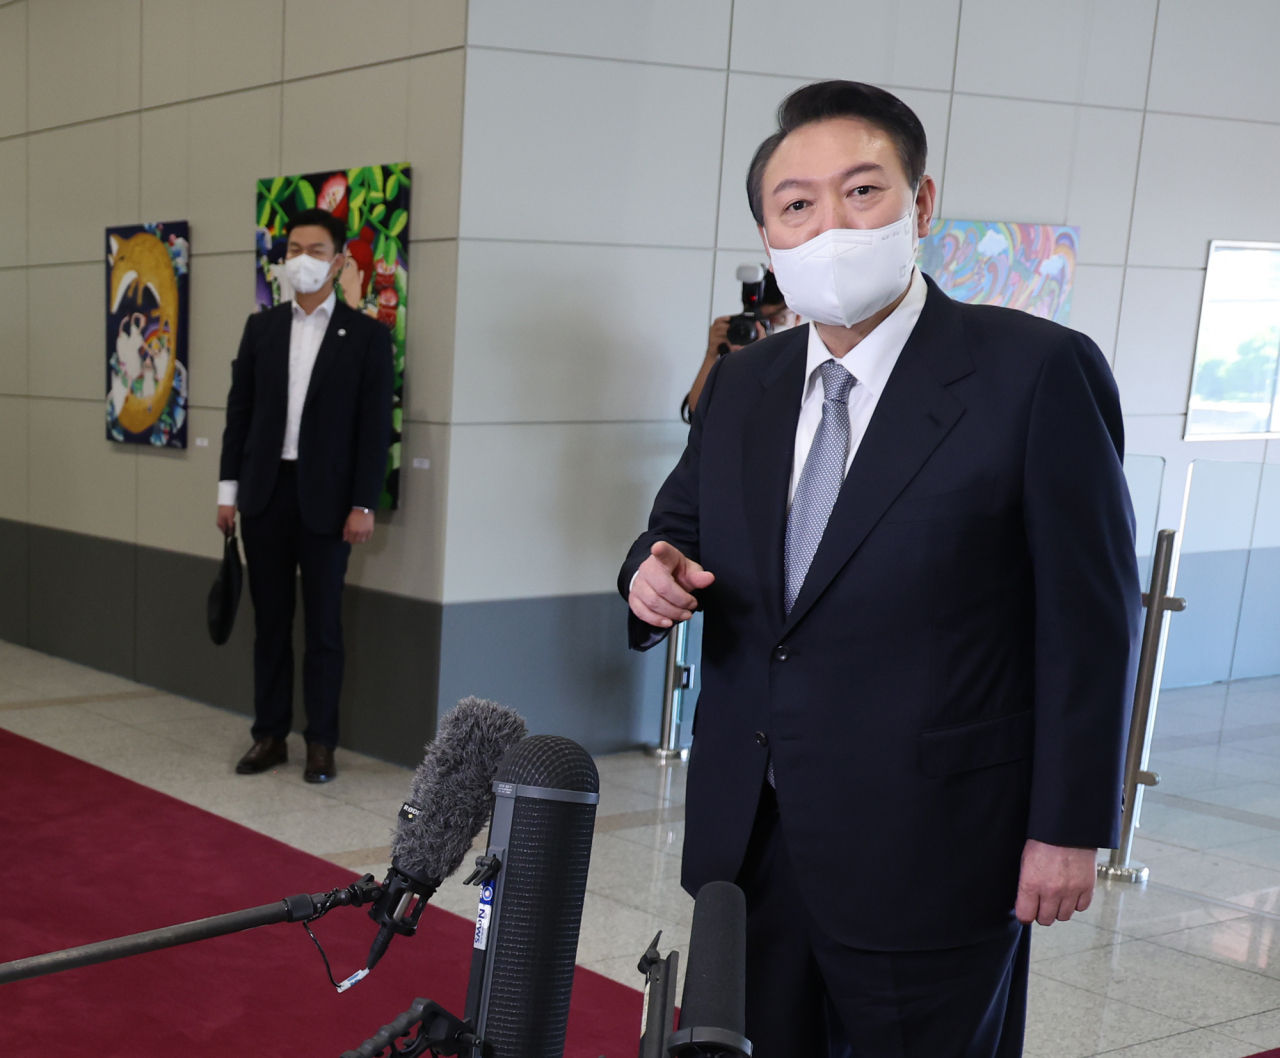 President Yoon Suk-yeol takes reporters' questions as he arrives for work at the presidential office in Seoul on Thursday. (Yonhap)